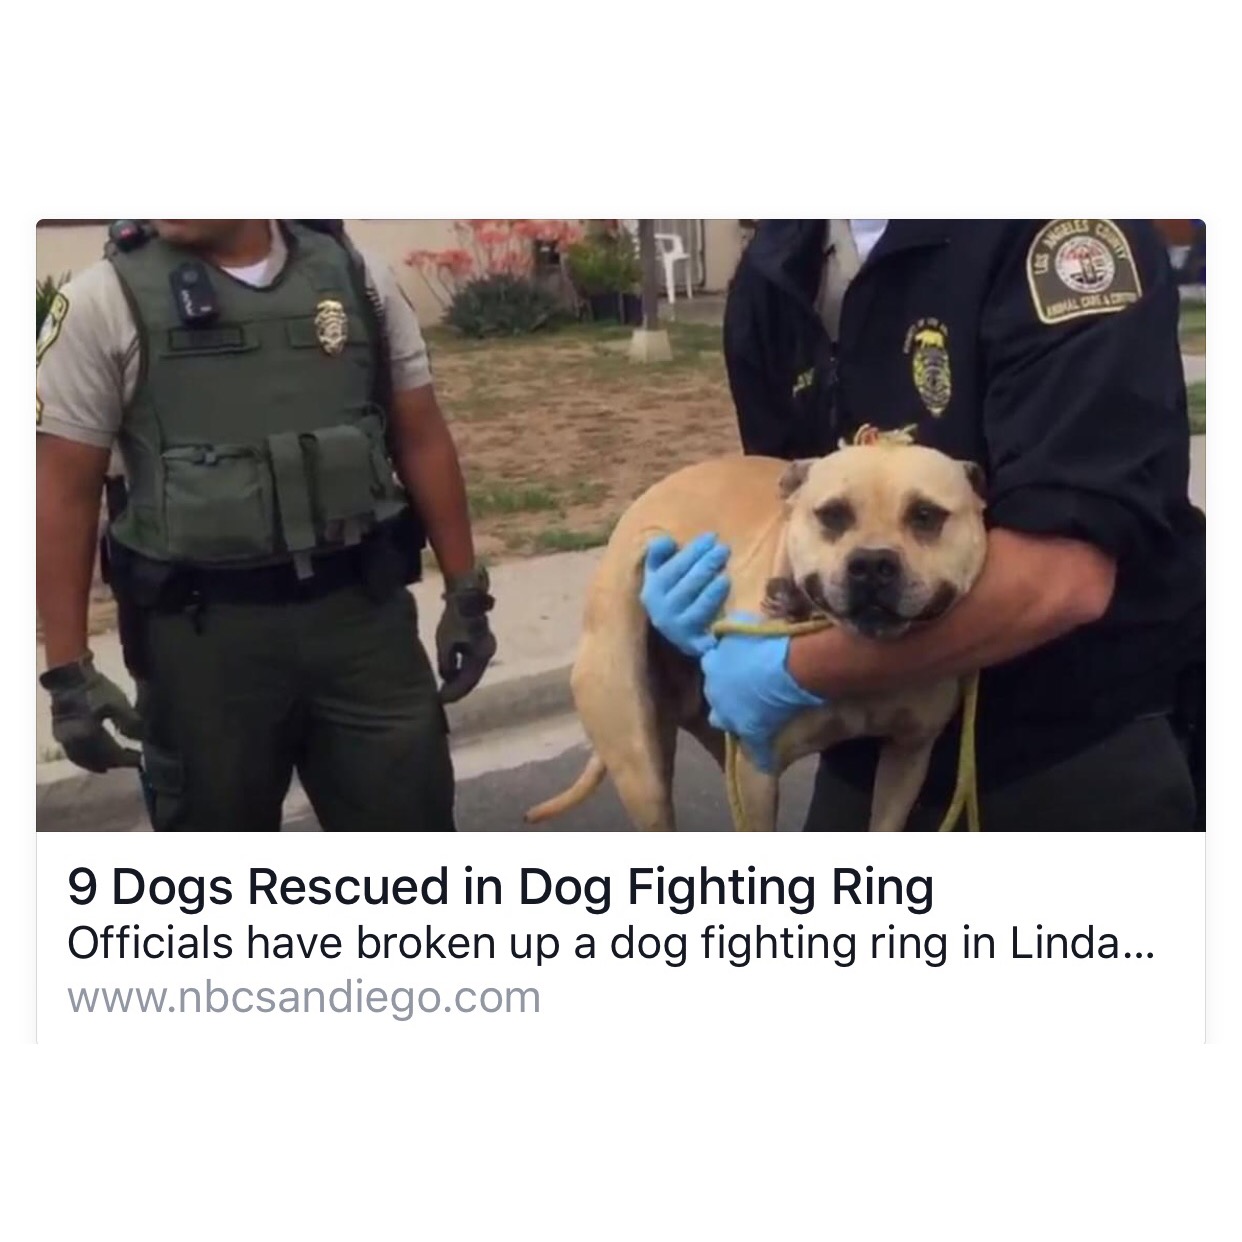 DOGFIGHTING RING BUST IN SAN DIEGO